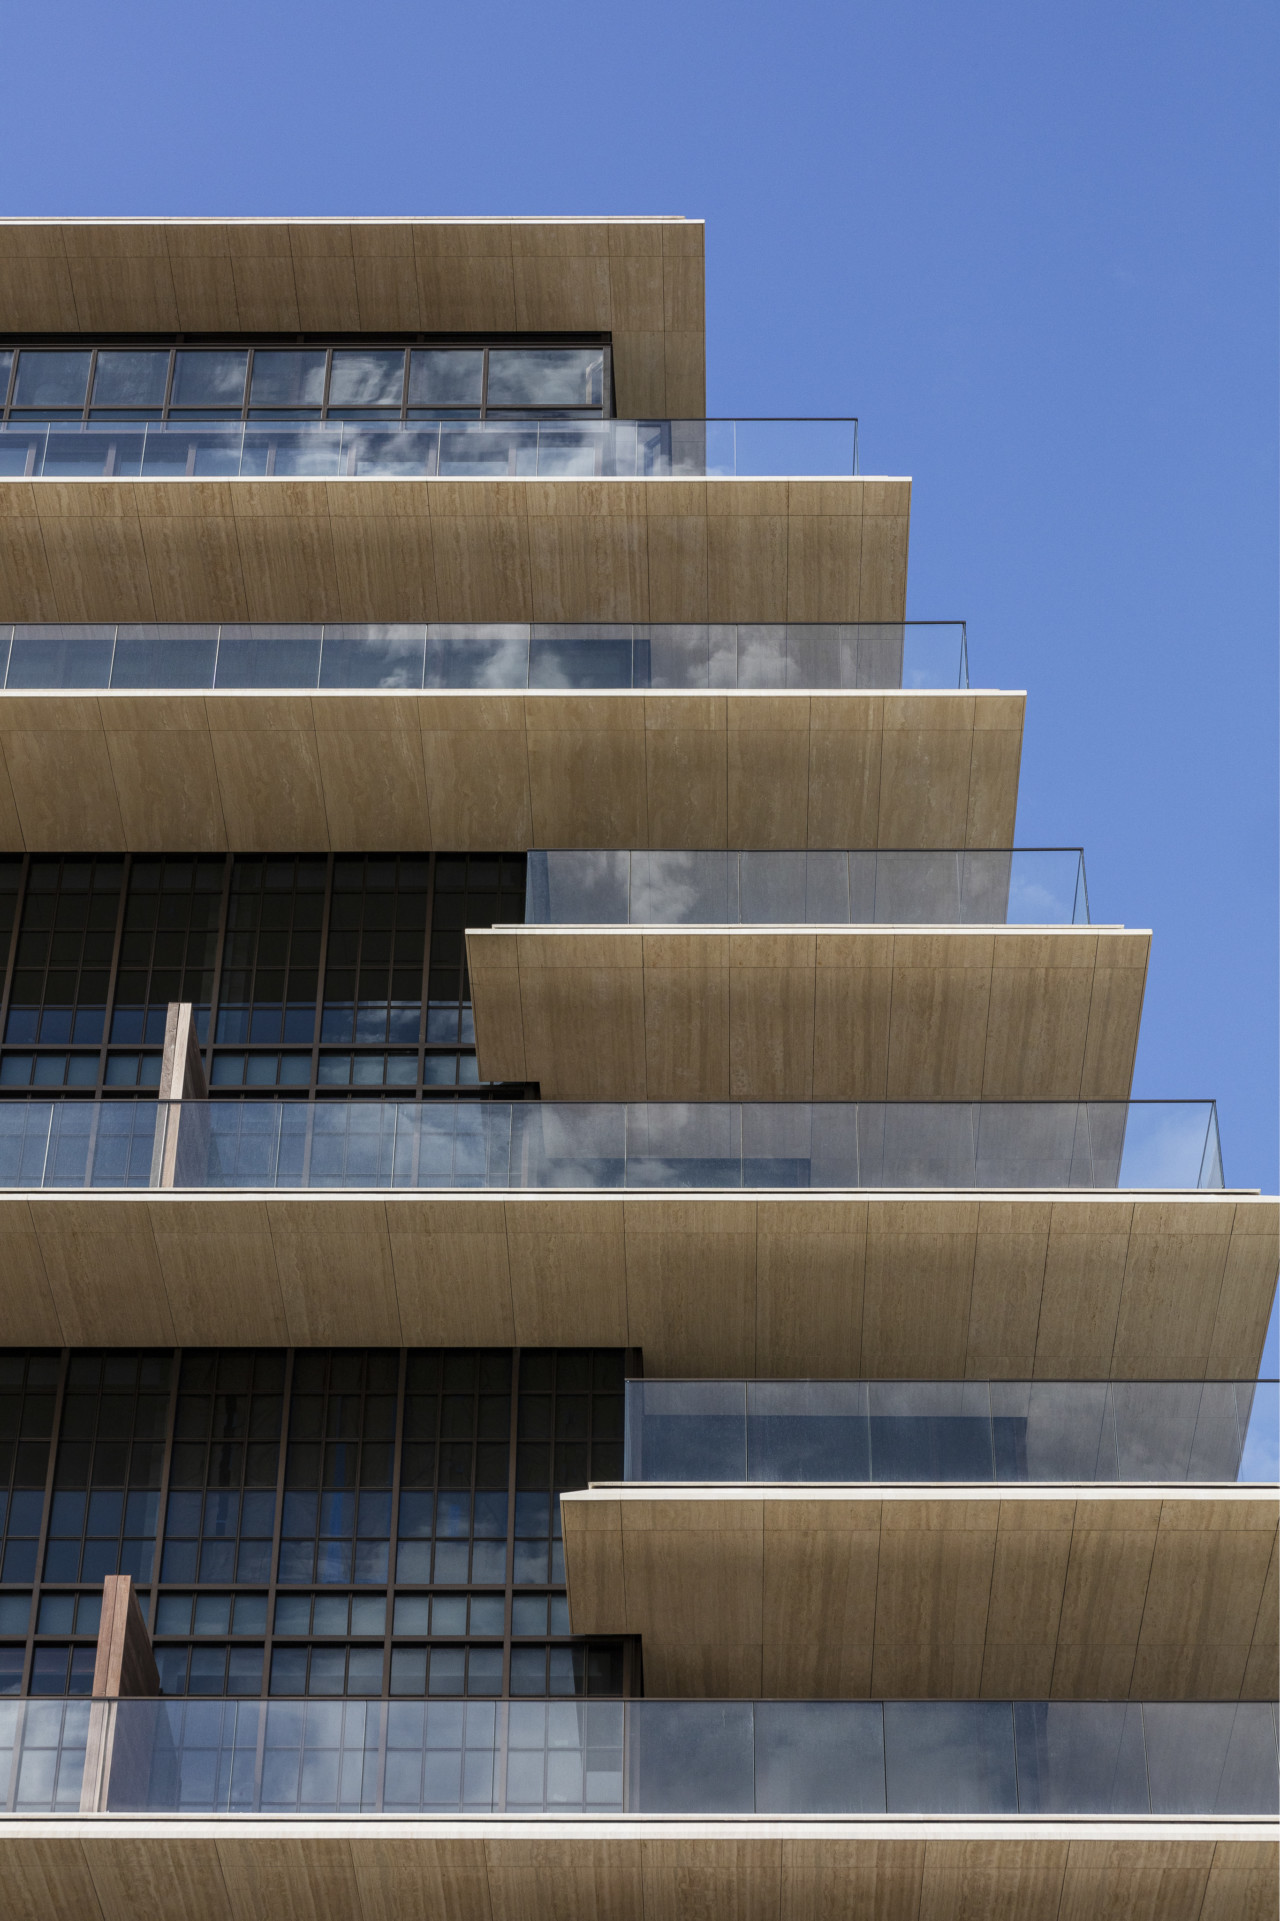 Detail image of the balconies highlighting varying sizes